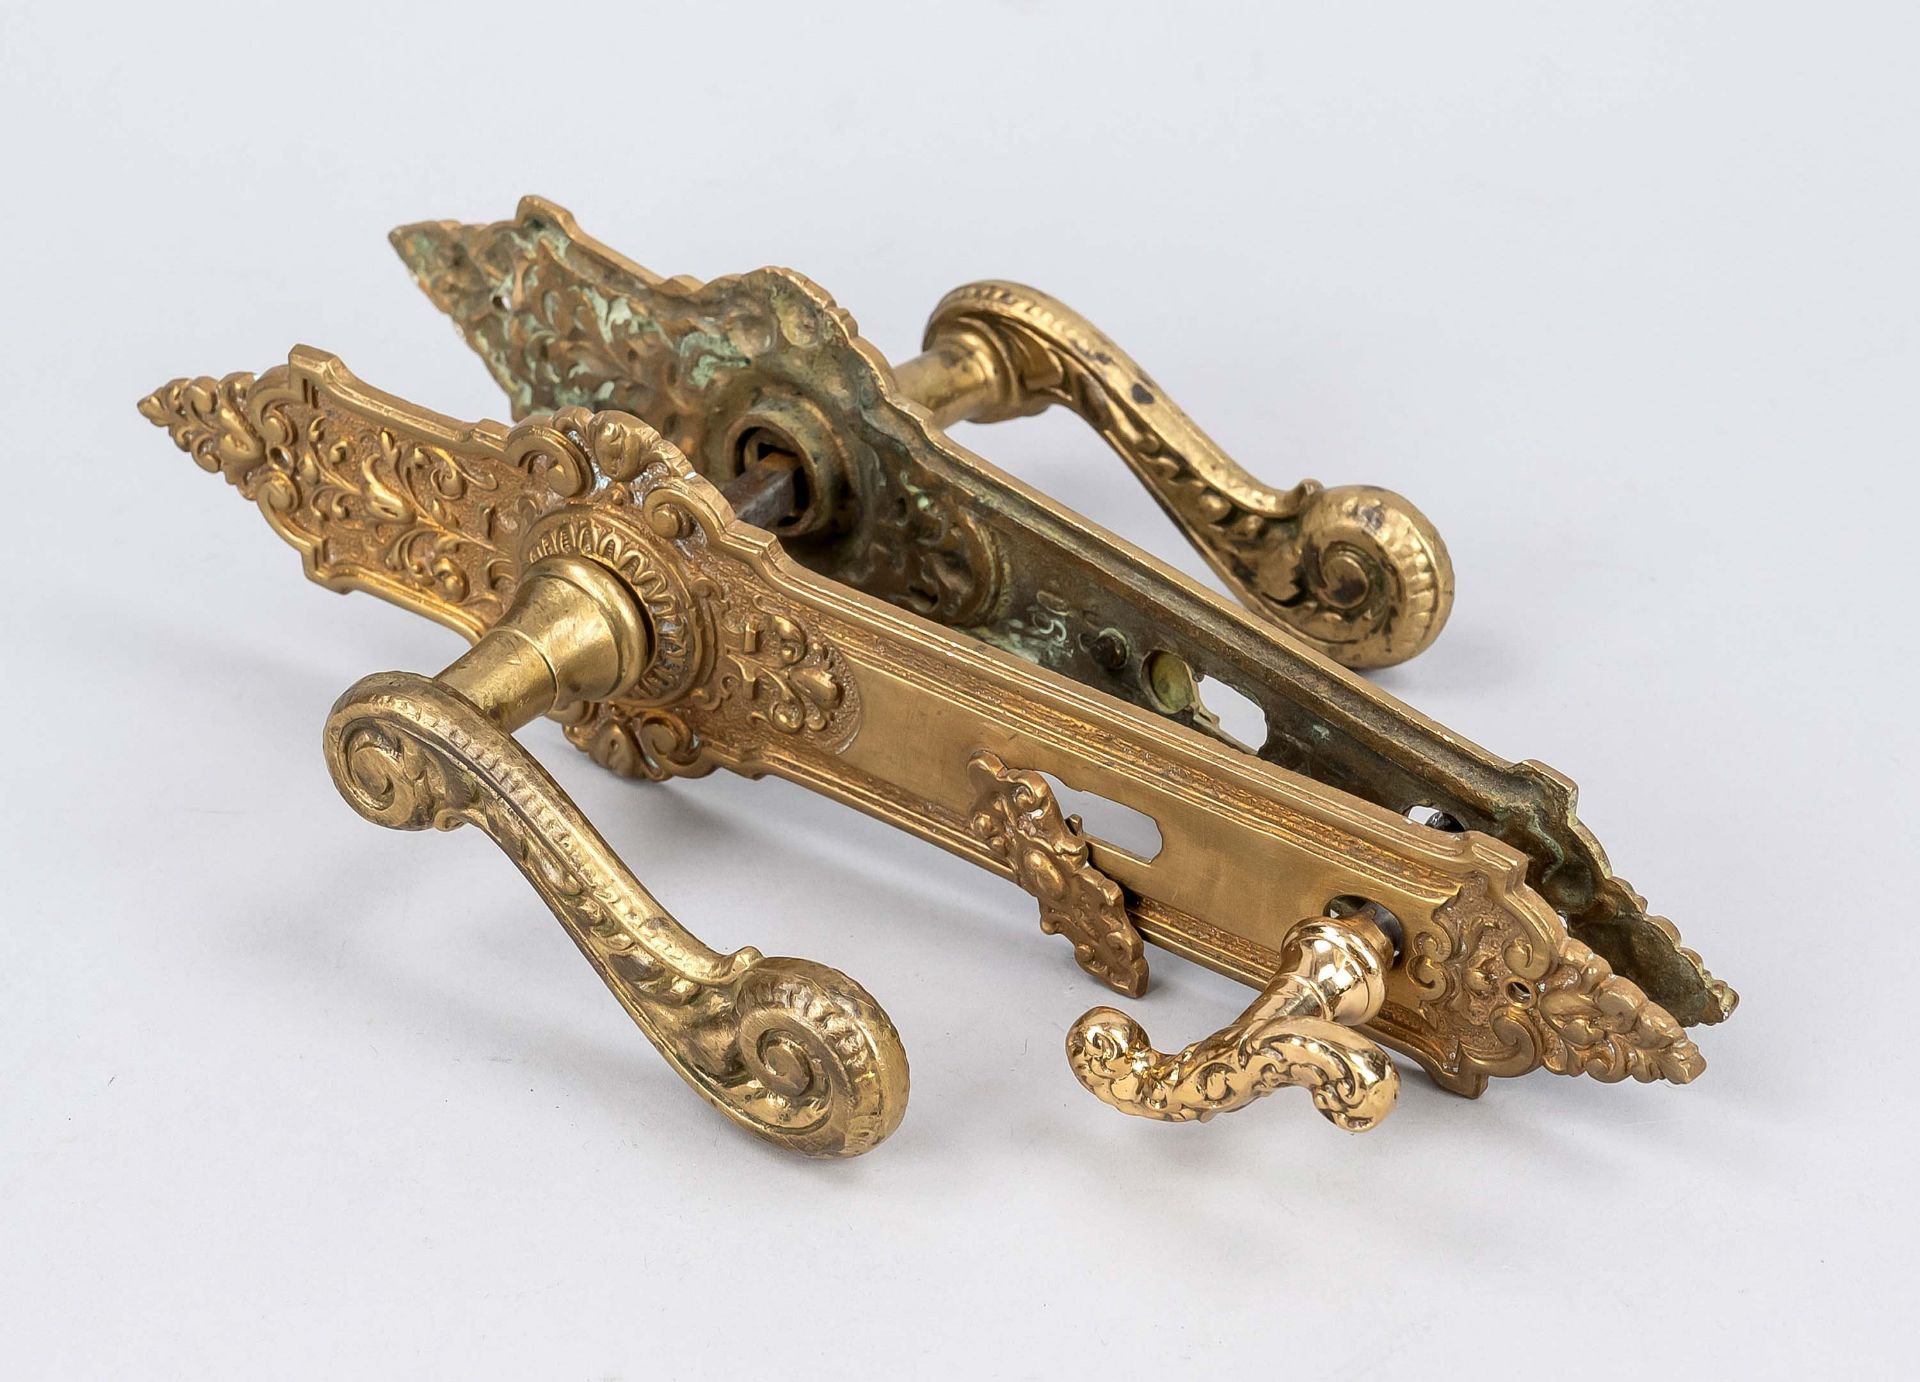 Handle set, end of the 19th century, brass. Curved ornamented handle with a curved ornamental